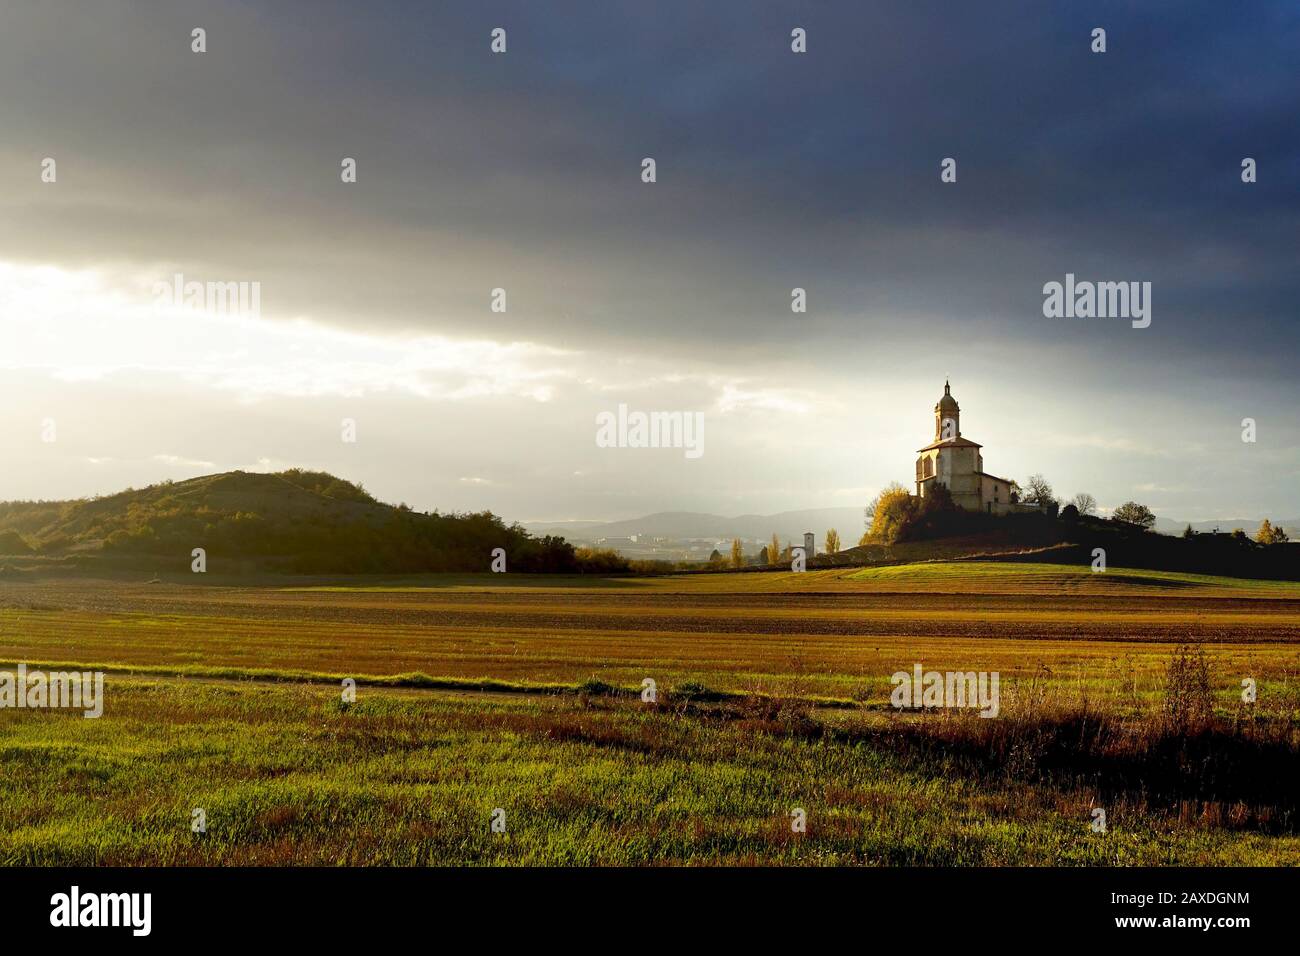 Dark skies over an old Church stood alone on a hill bathed in sunlight Stock Photo